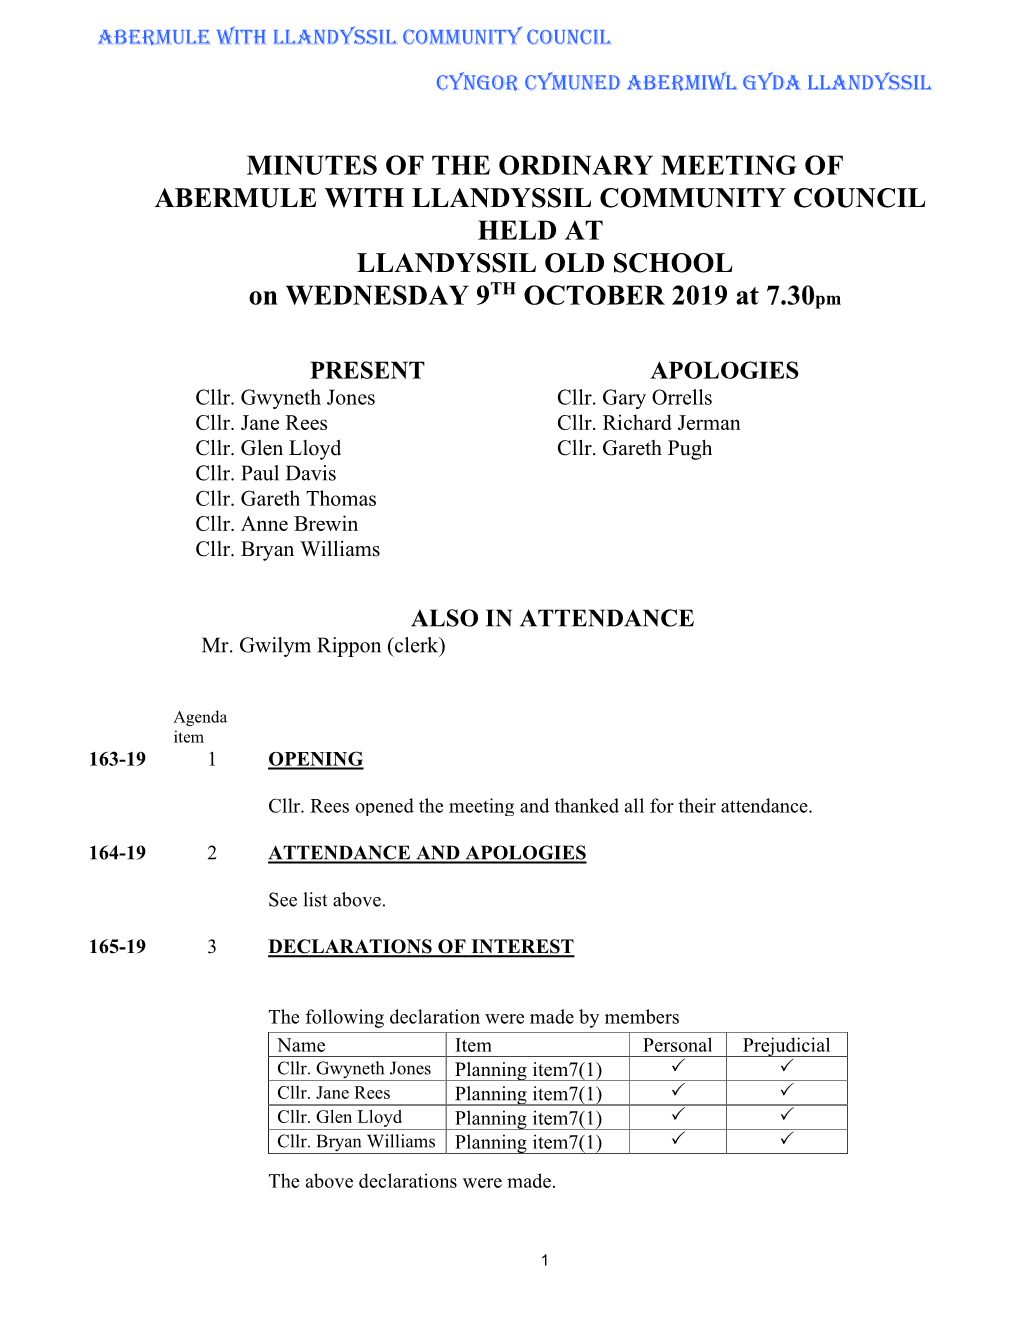 MINUTES of the ORDINARY MEETING of ABERMULE with LLANDYSSIL COMMUNITY COUNCIL HELD at LLANDYSSIL OLD SCHOOL TH on WEDNESDAY 9 OCTOBER 2019 at 7.30Pm